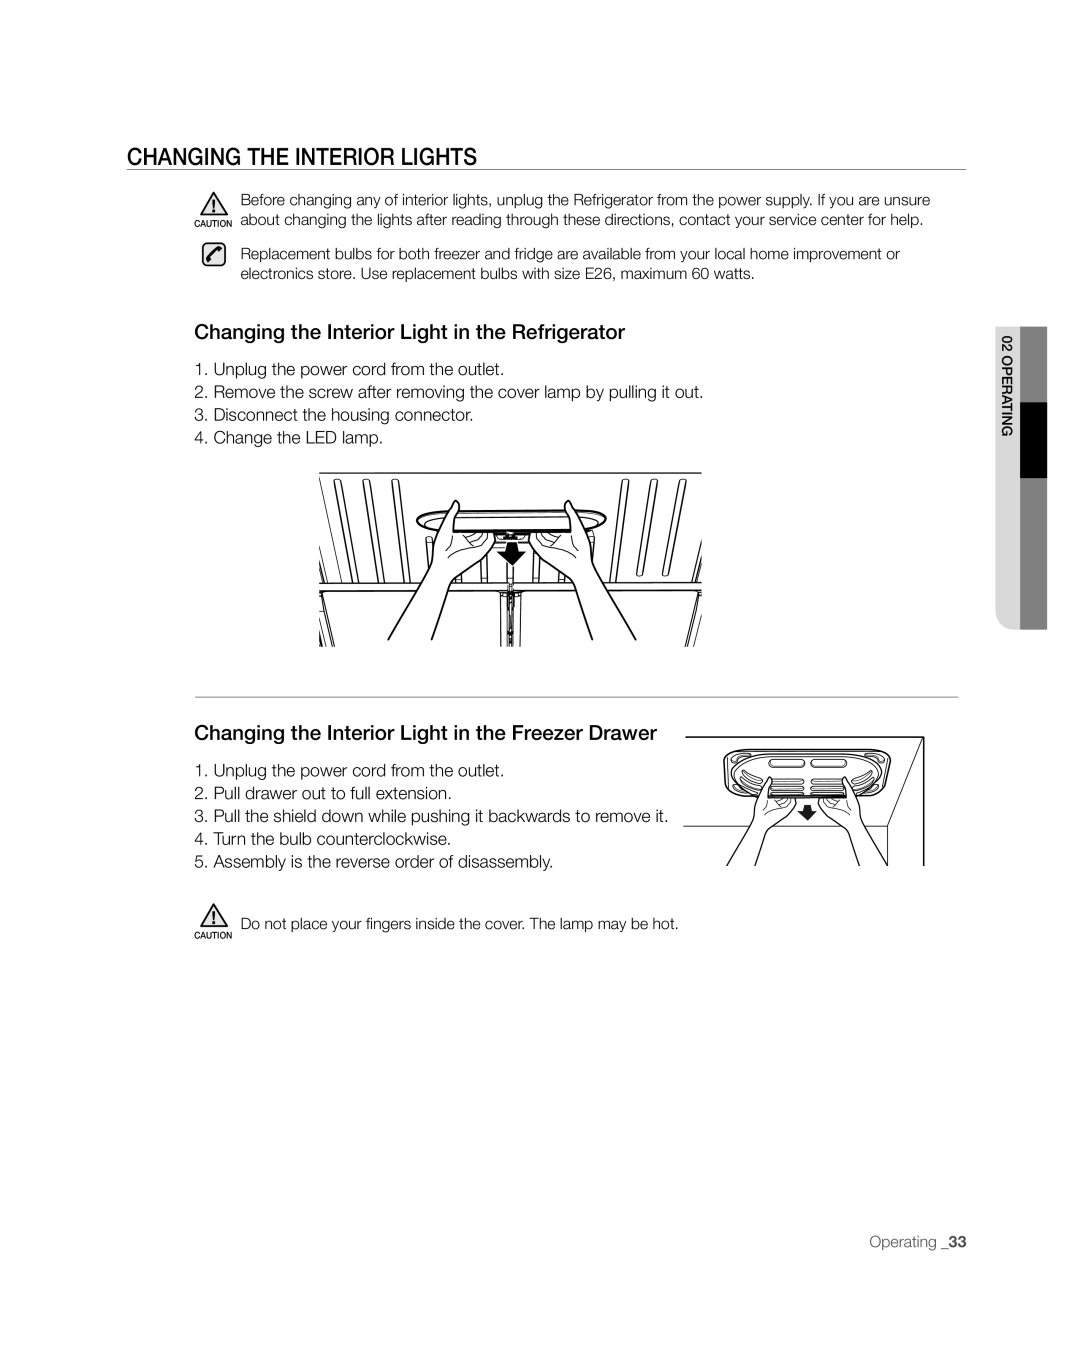 Samsung RFG297AAWP user manual CHANGING THE INTERIOR LigHtS, Changing the Interior Light in the Refrigerator 